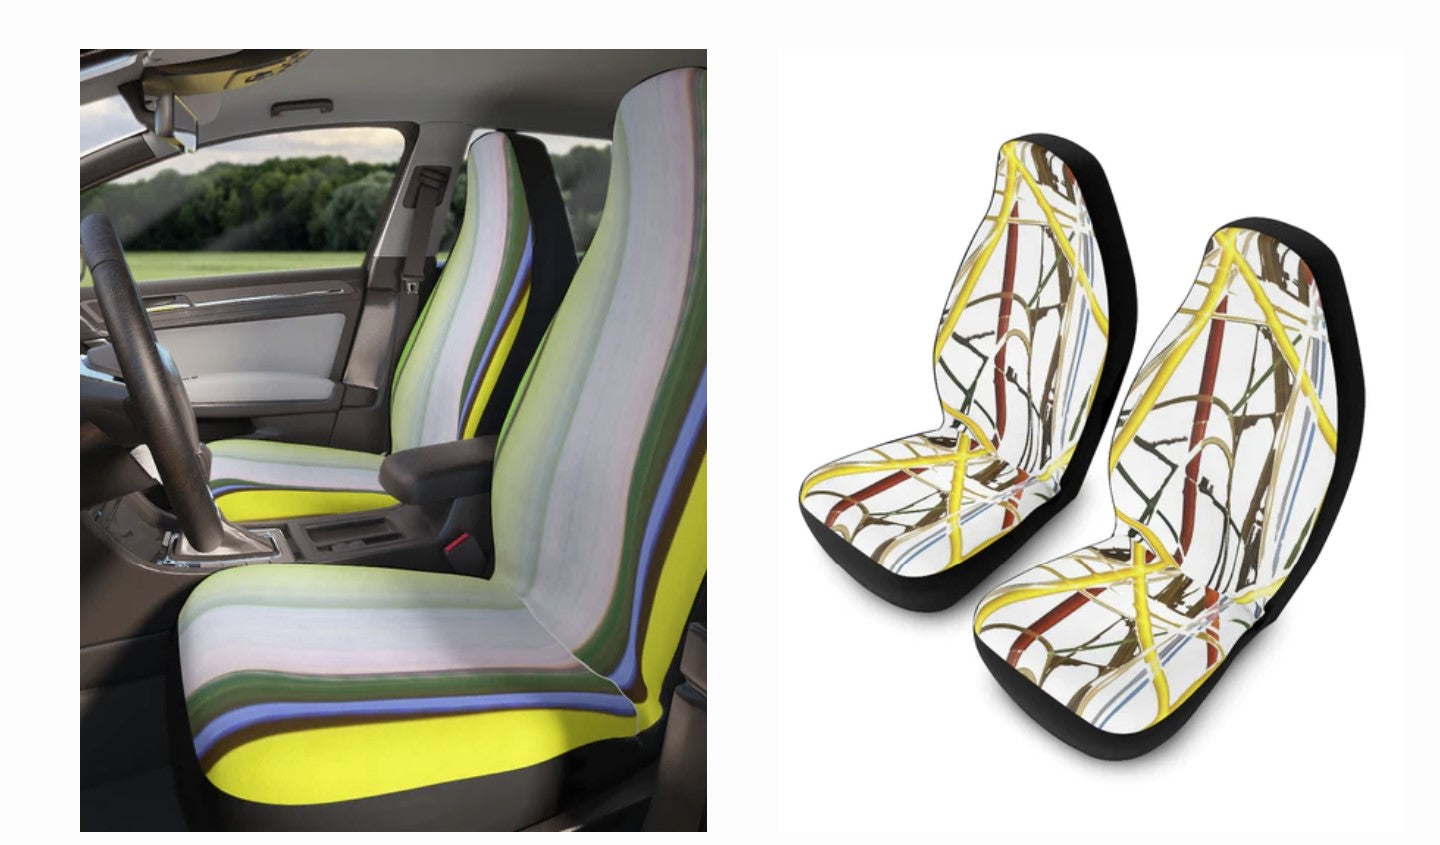 CAR SEAT COVERS that go faster